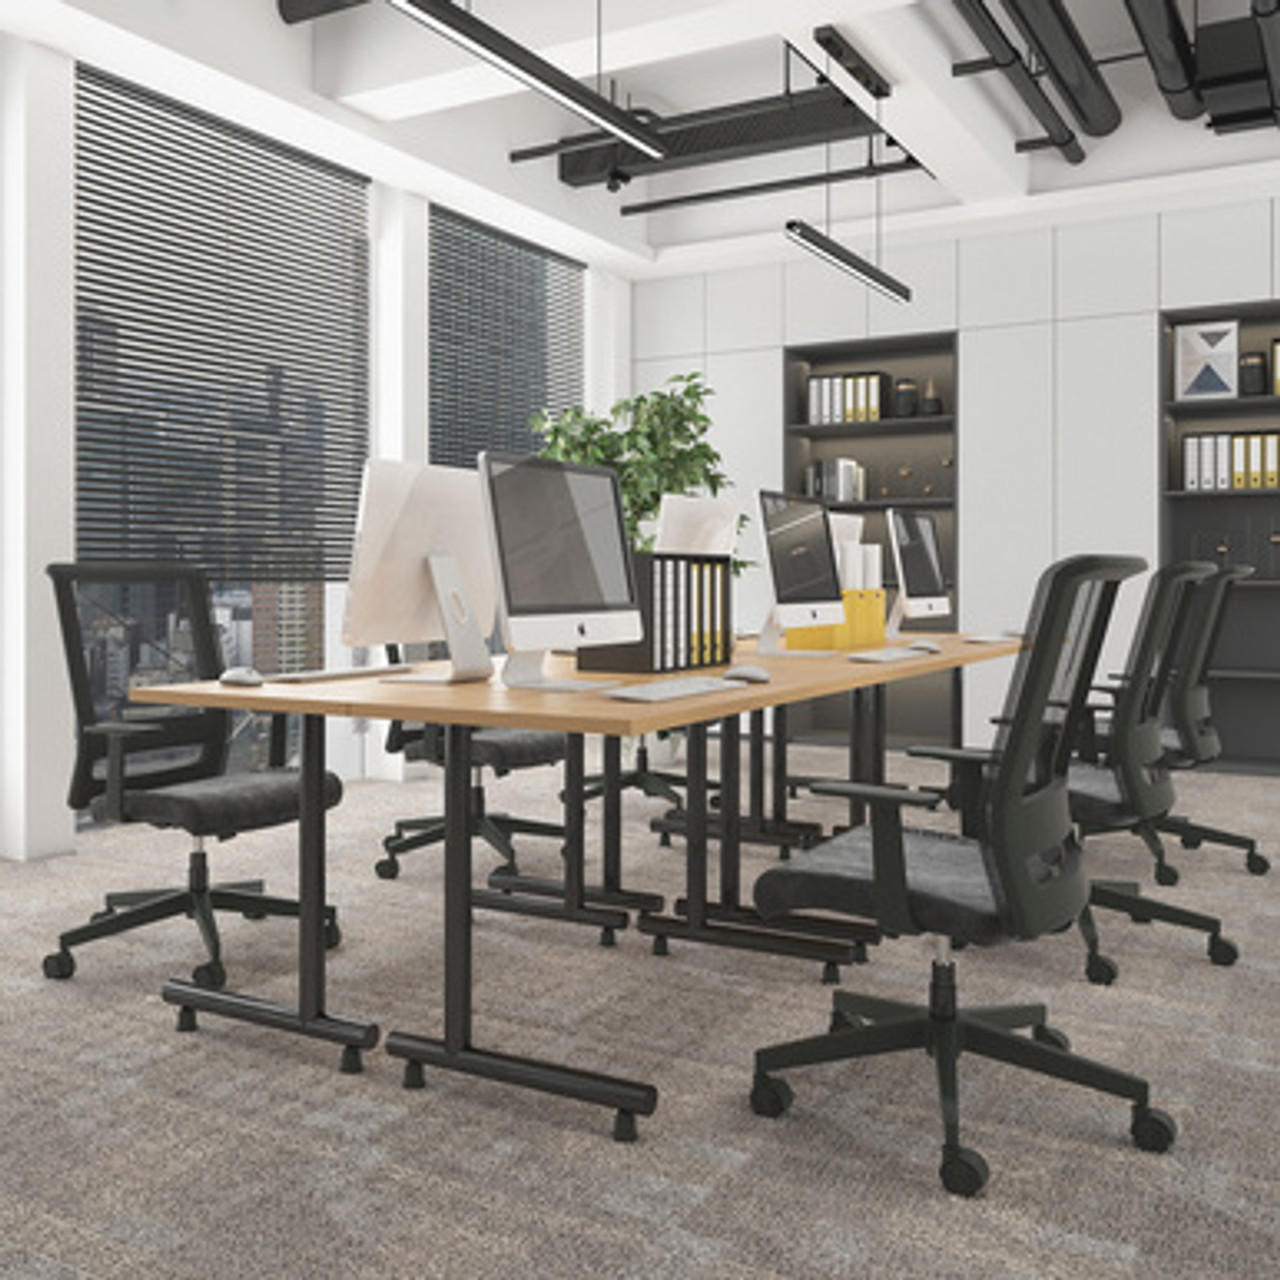  Office Source 6 Piece Training Room Table Configuration OST24 